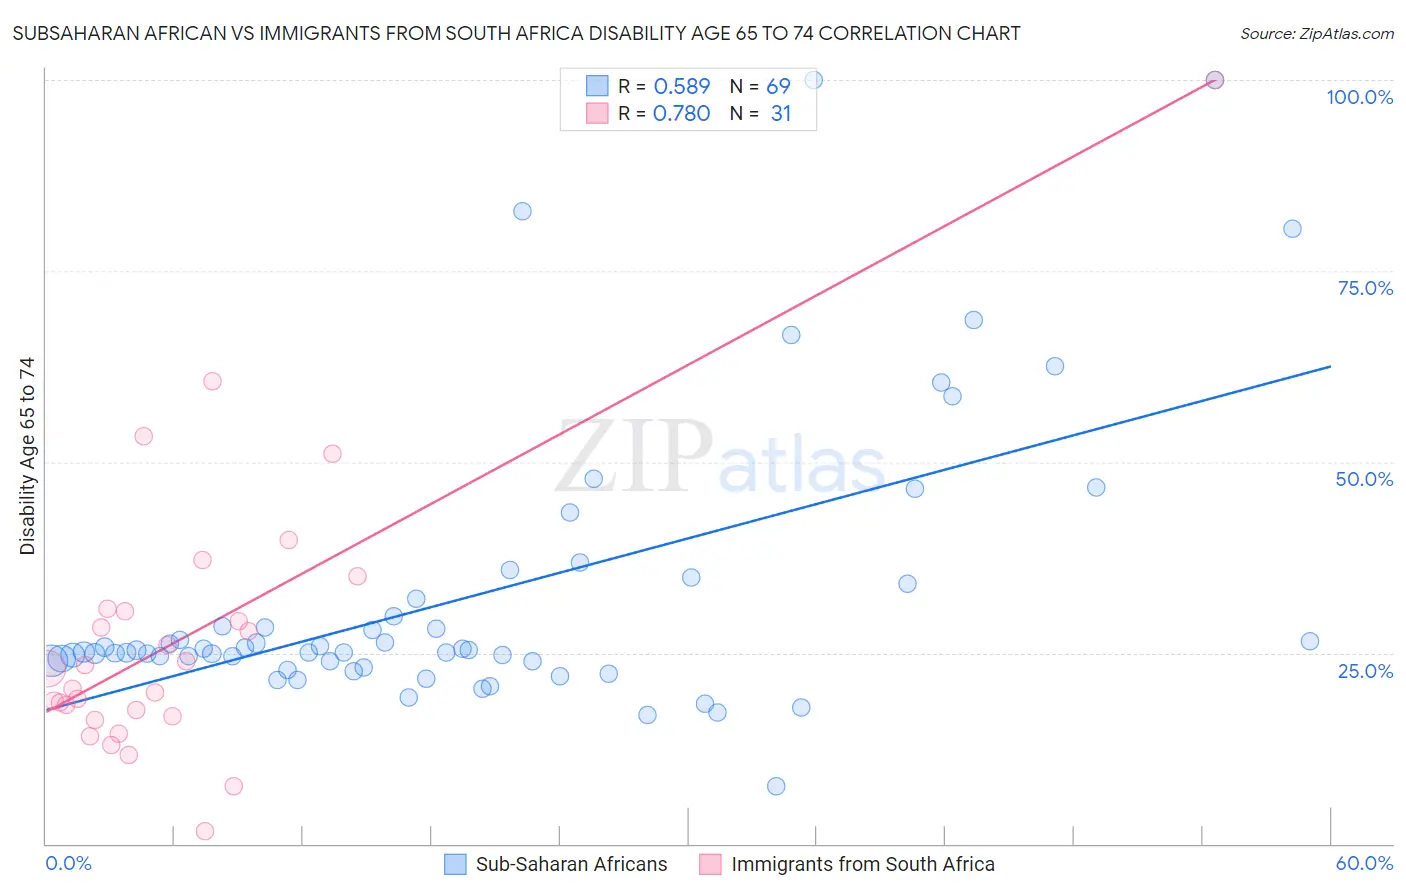 Subsaharan African vs Immigrants from South Africa Disability Age 65 to 74